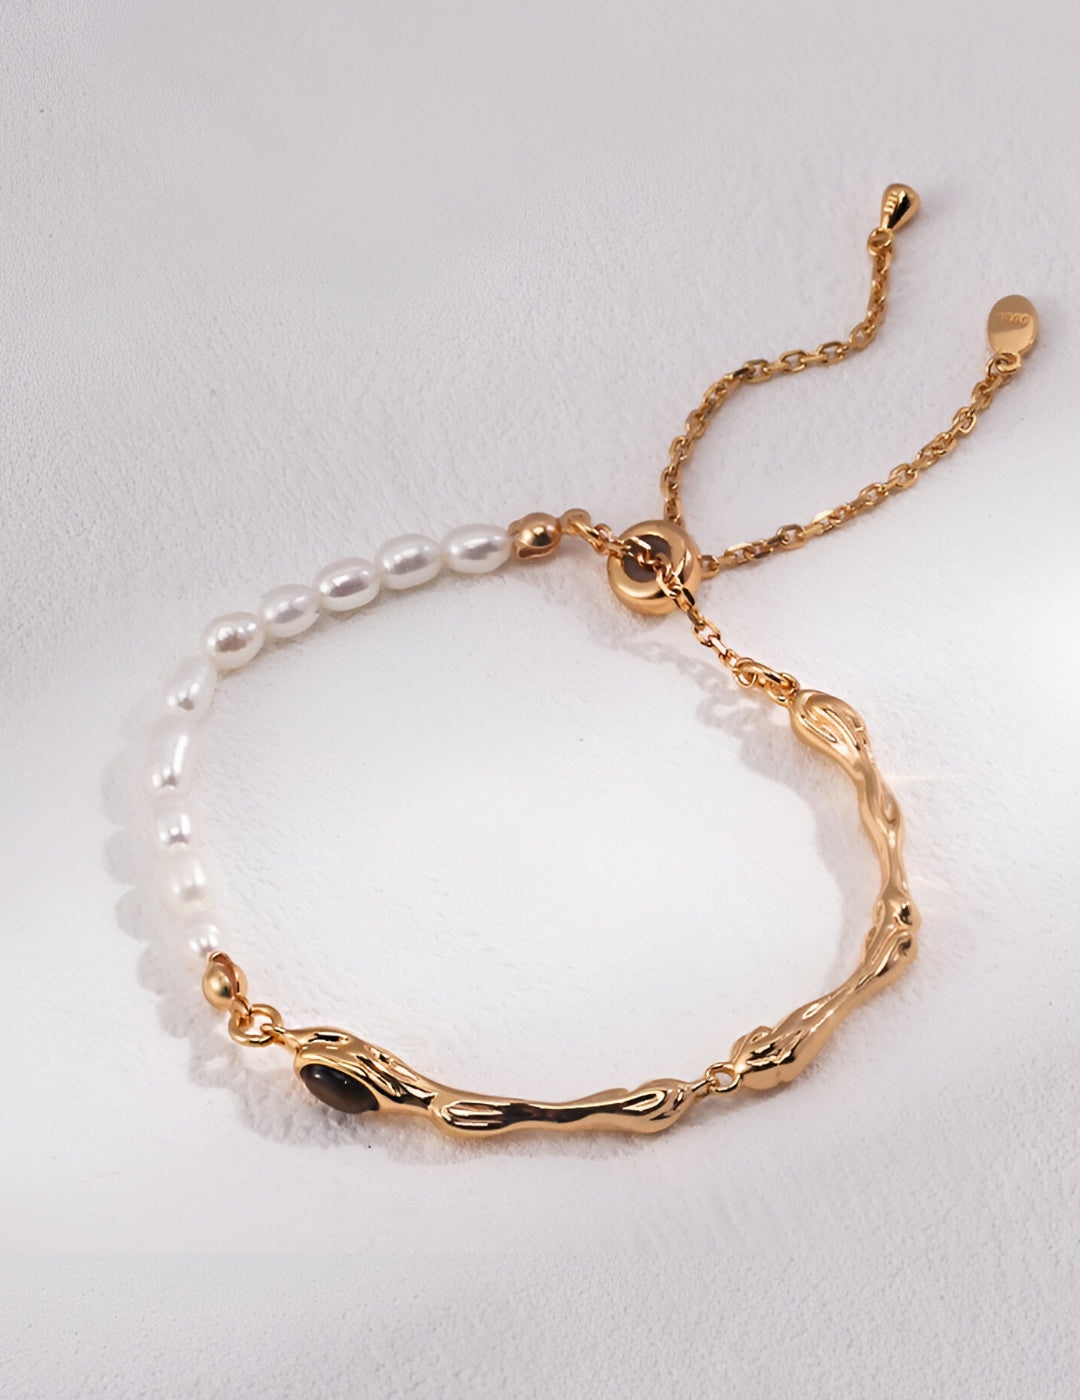  Luxe Bracelet  - S925 sterling pure silver -18K Gold Vermeil  -   Pearl Luminance - adorned with majestic Tiger's Eye gemstones that capture every gaze - Elevate your style with a touch of exotic allure. Embrace beauty and confidence, effortlessly